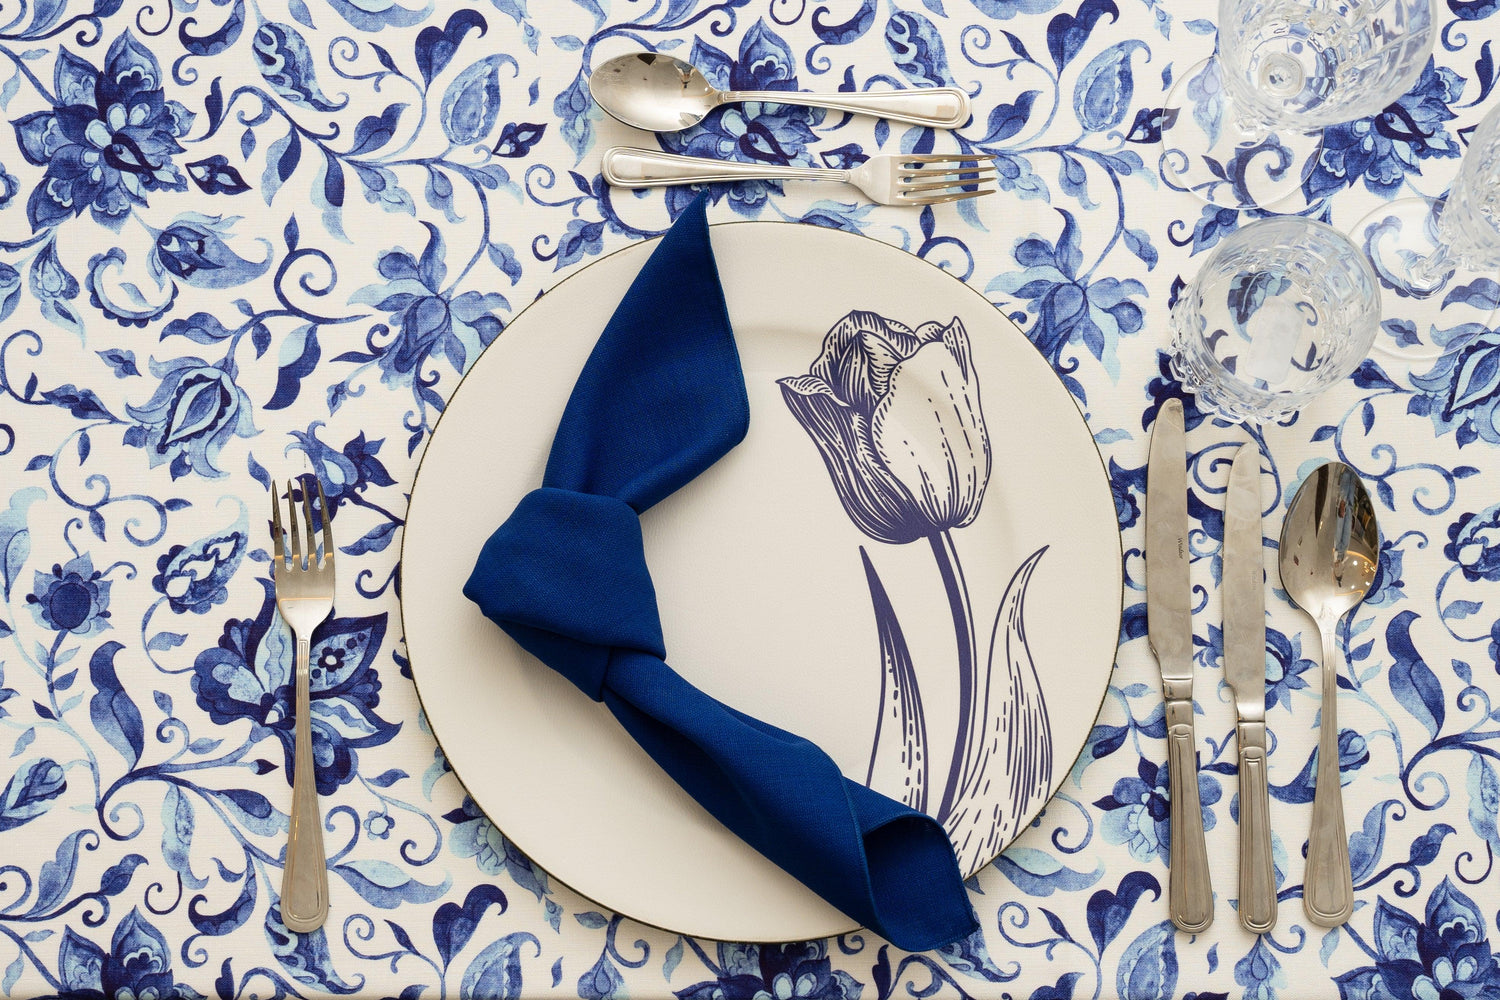 A table flatlay in blue with a printed tablecloth and blue napkin with silverware.